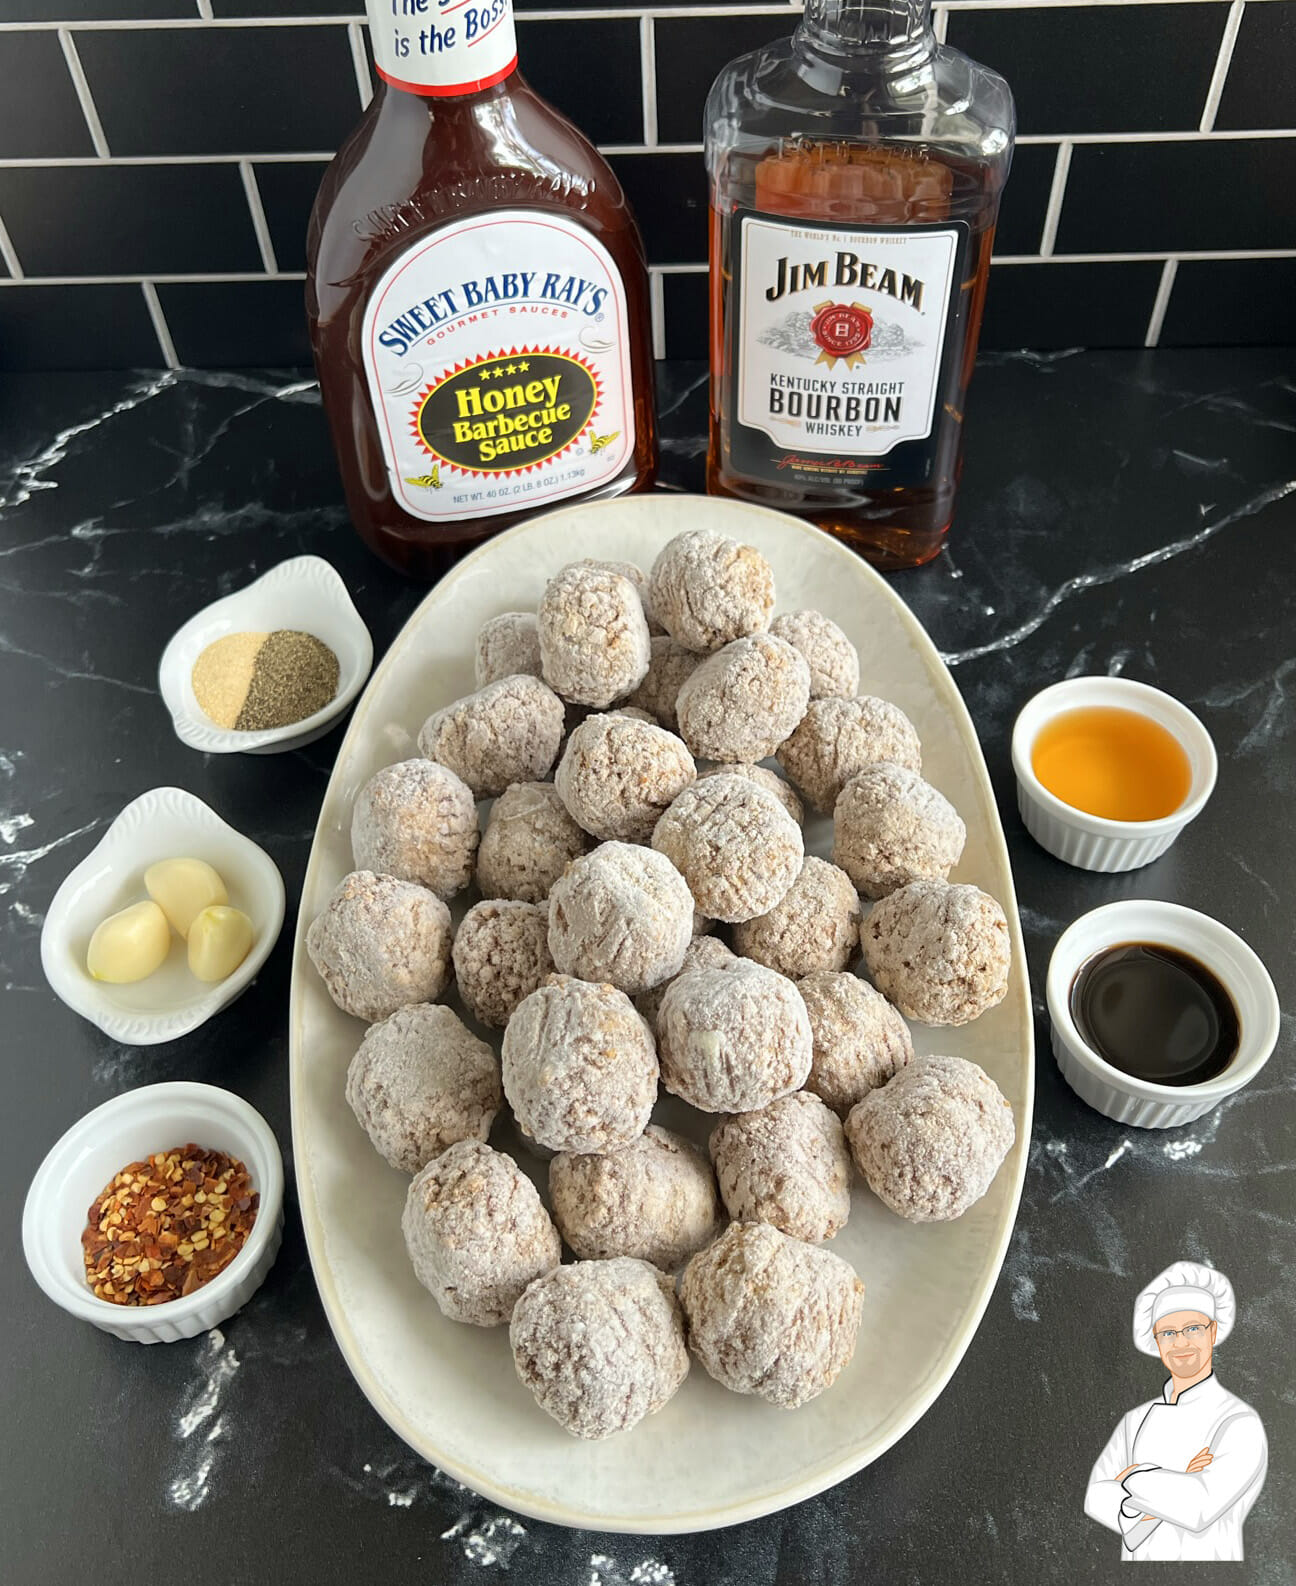 All the ingredients for slow cooker bourbon meatballs